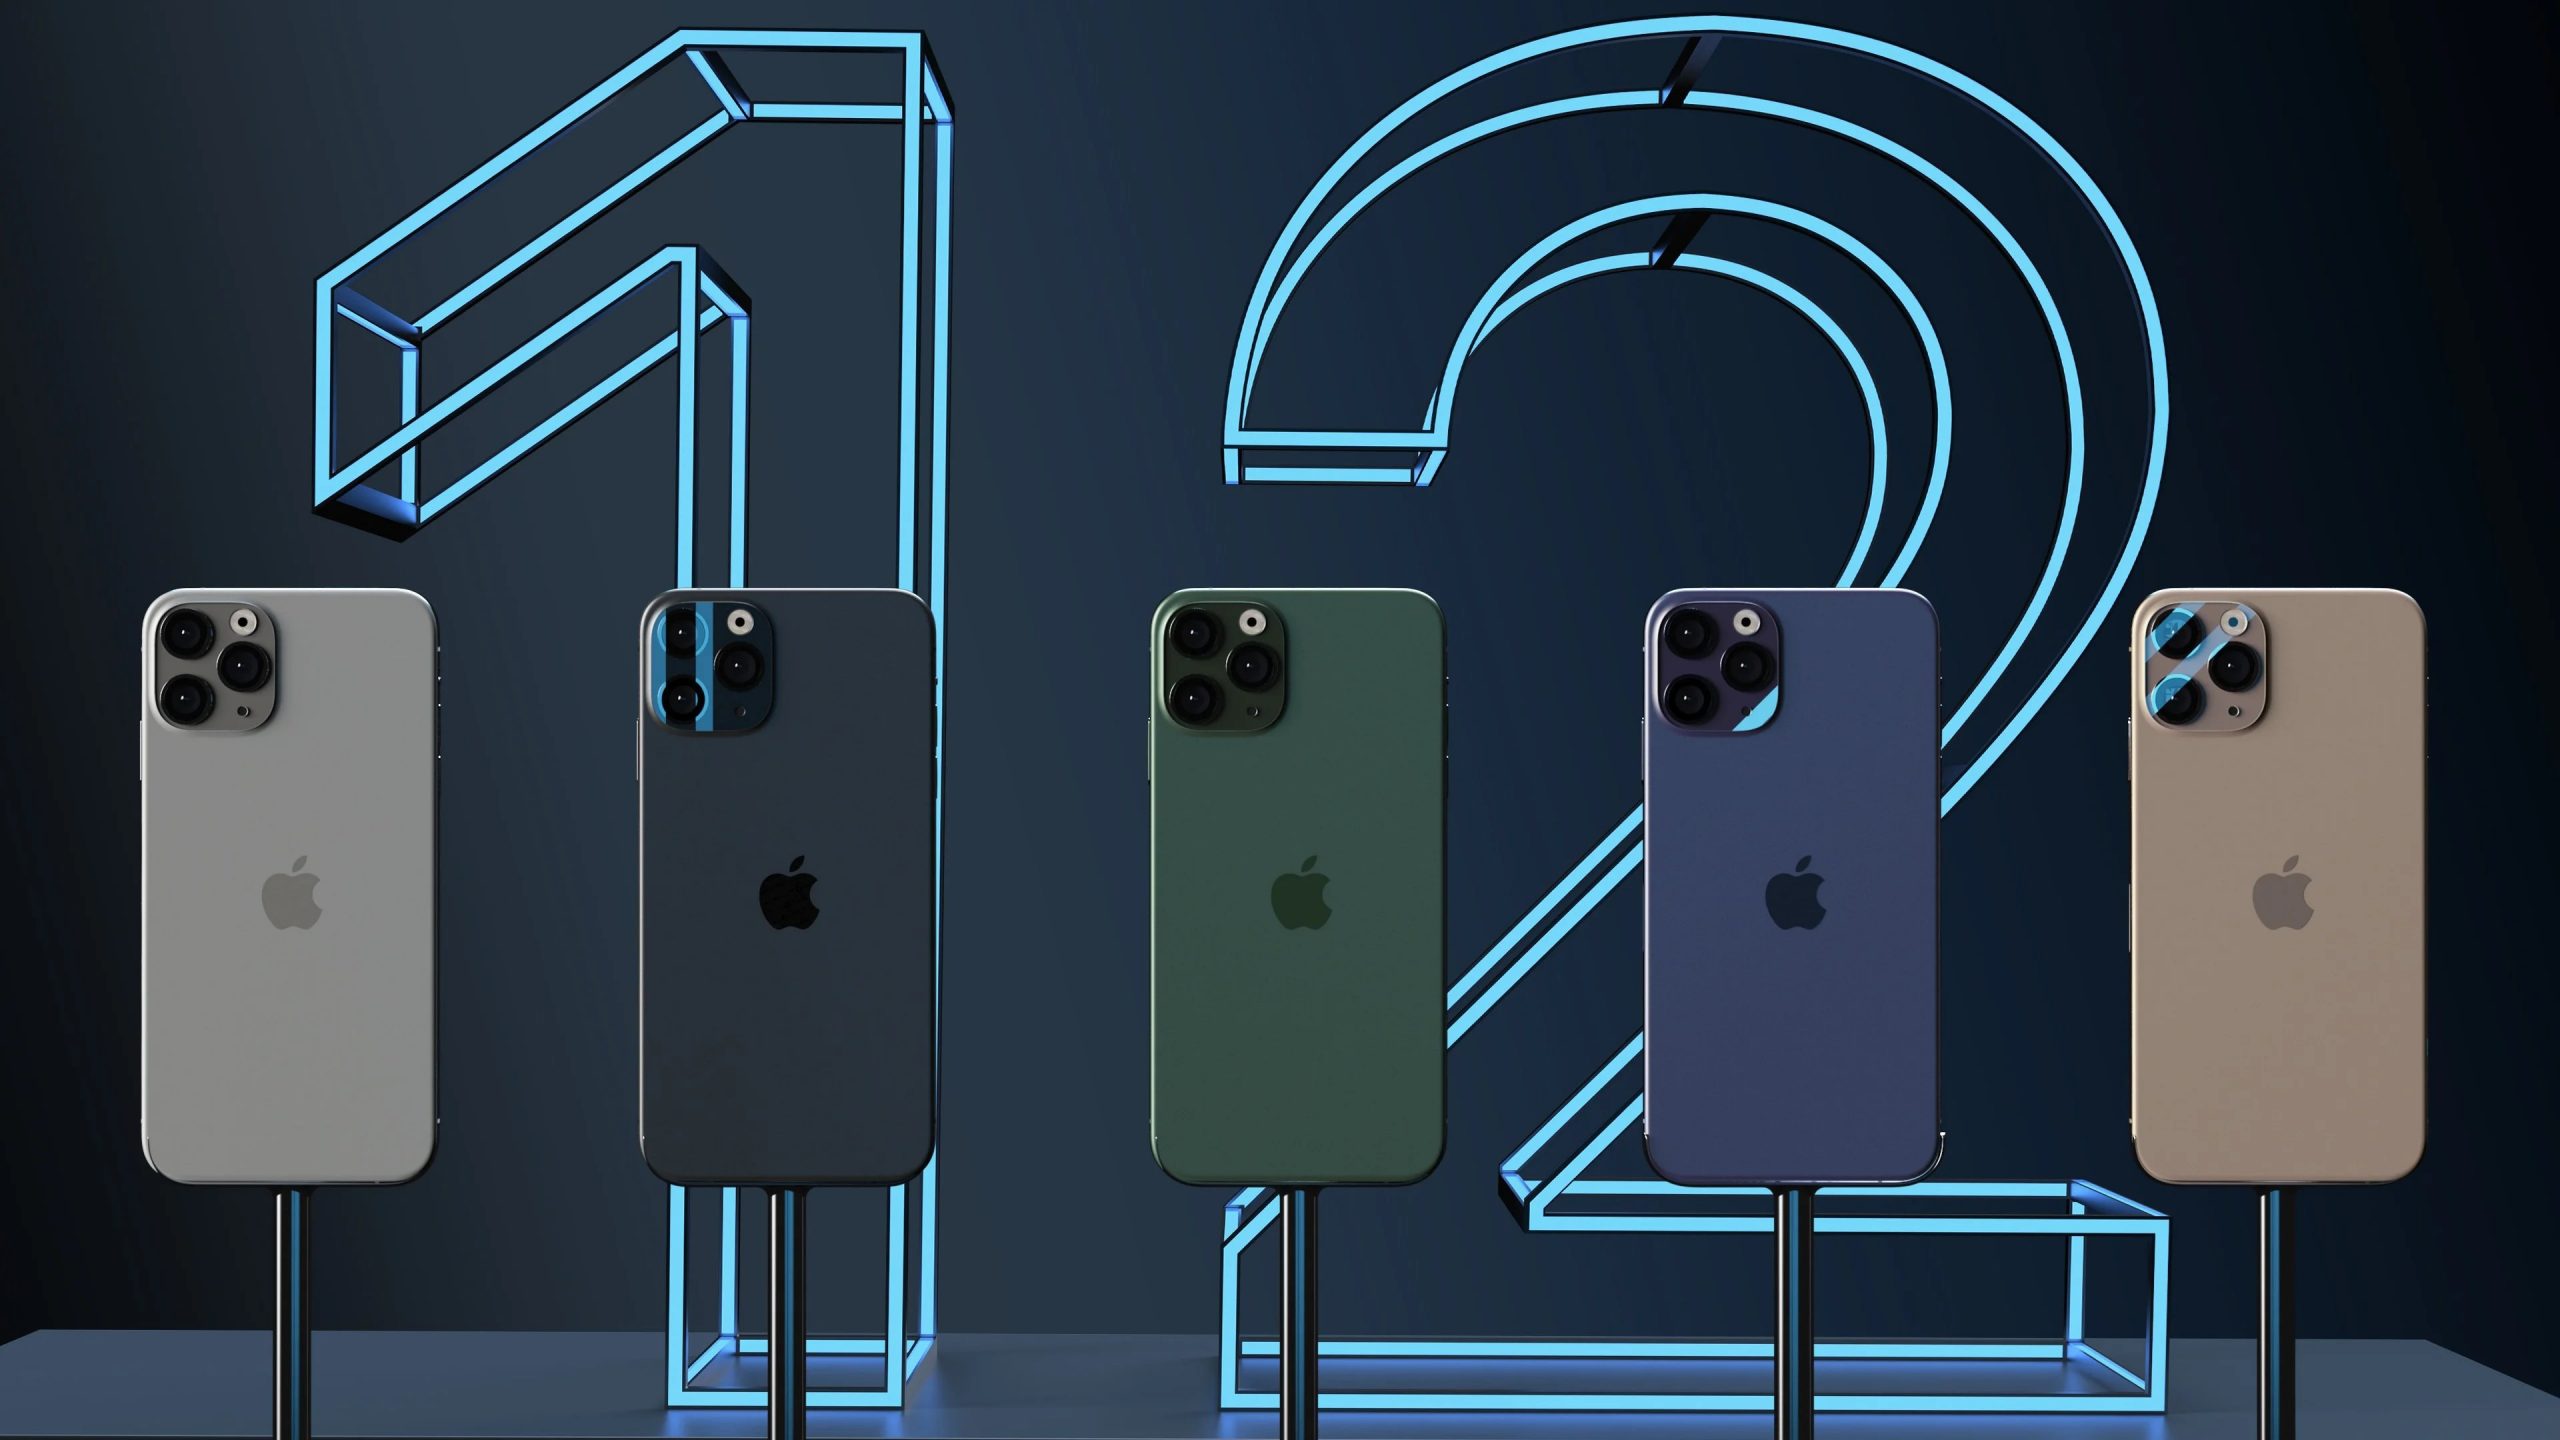 The iPhone 12 series are leaked... With 5G... And their pricing is